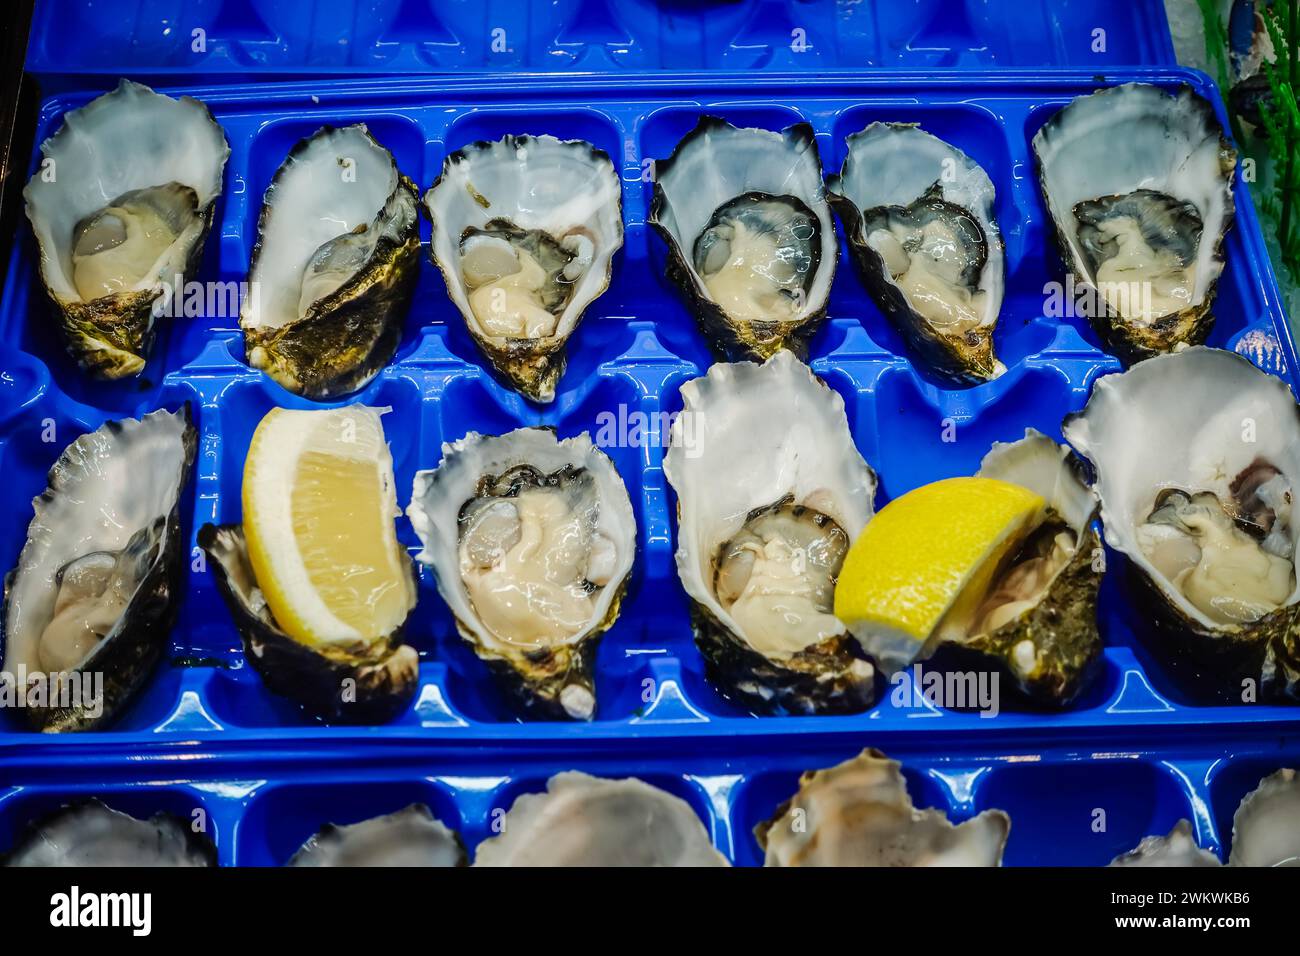 Pacific oysters, a product of Australia. Stock Photo